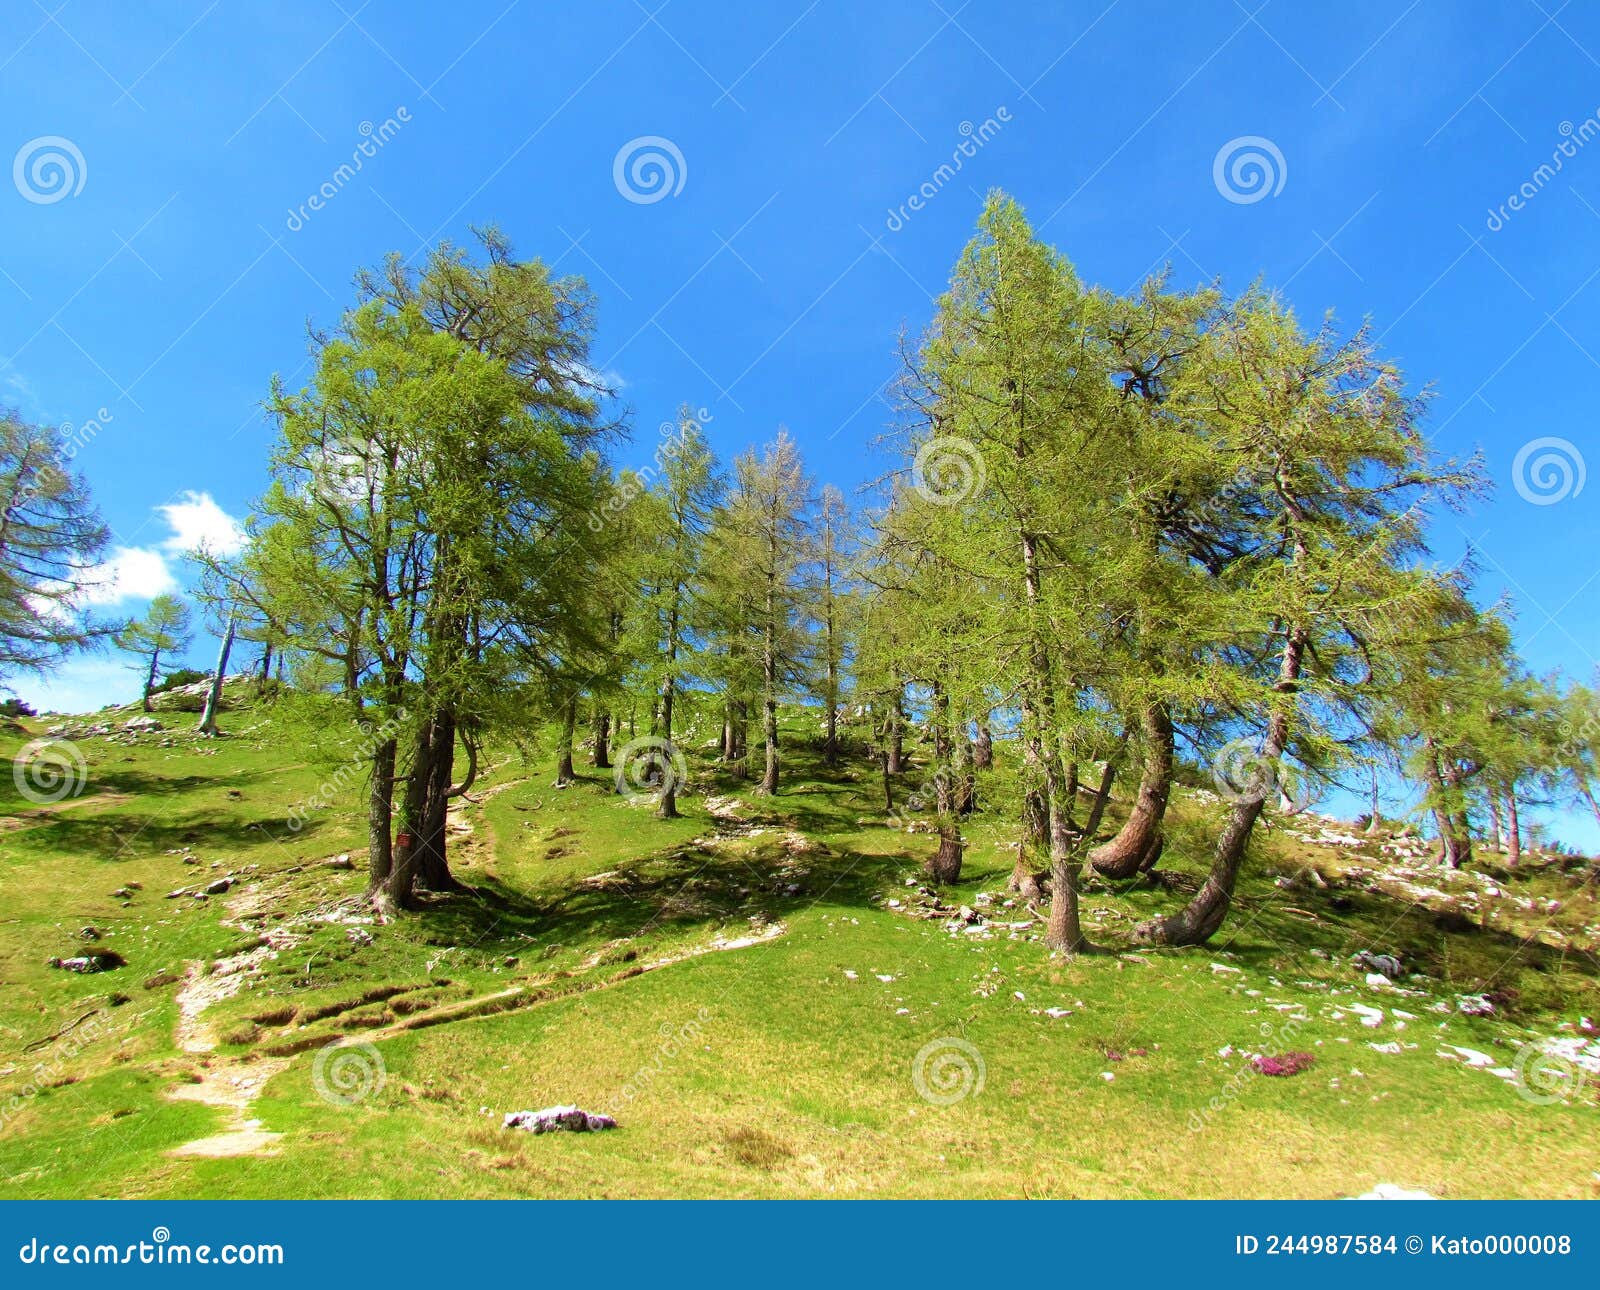 group of larch trees at sleme in julian alps, slovenia